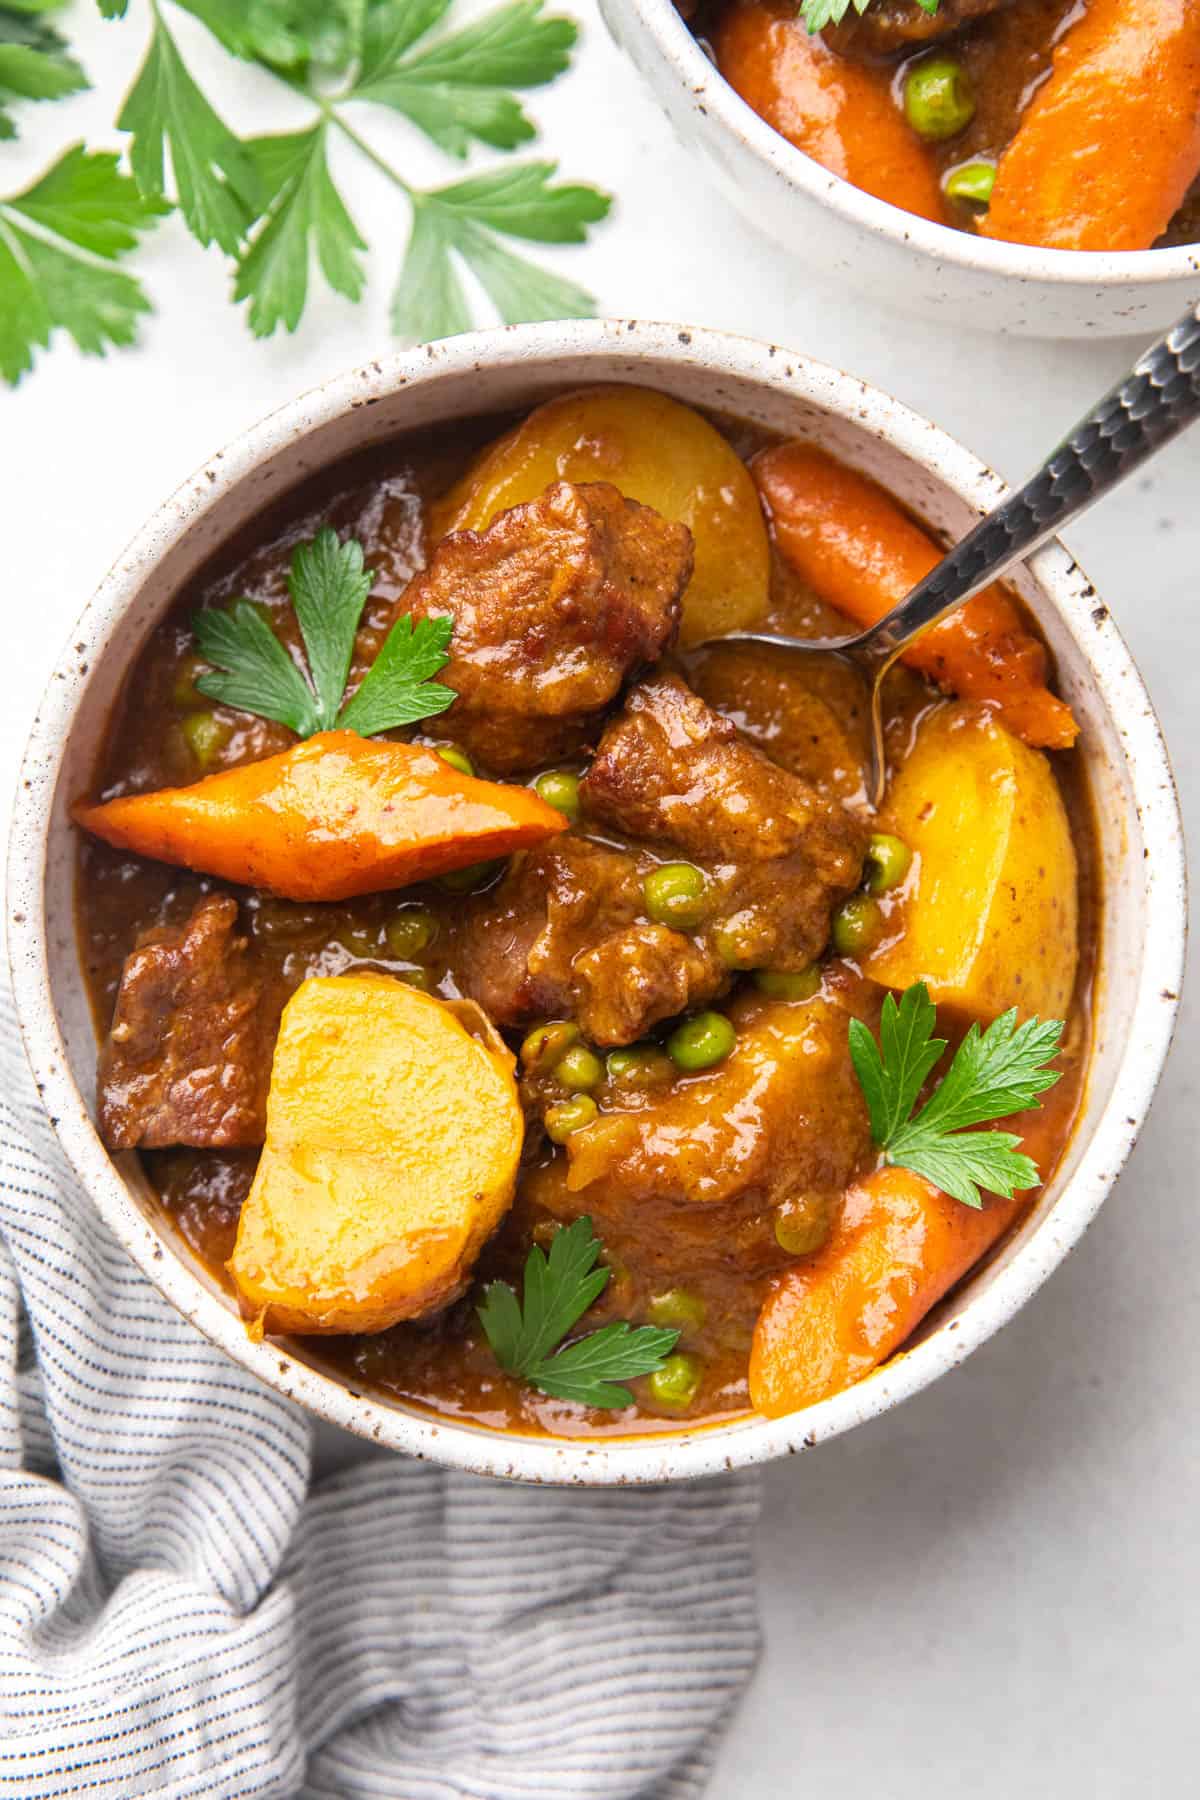 Stew with beef tips, potatoes, carrots, and peas in a bowl.